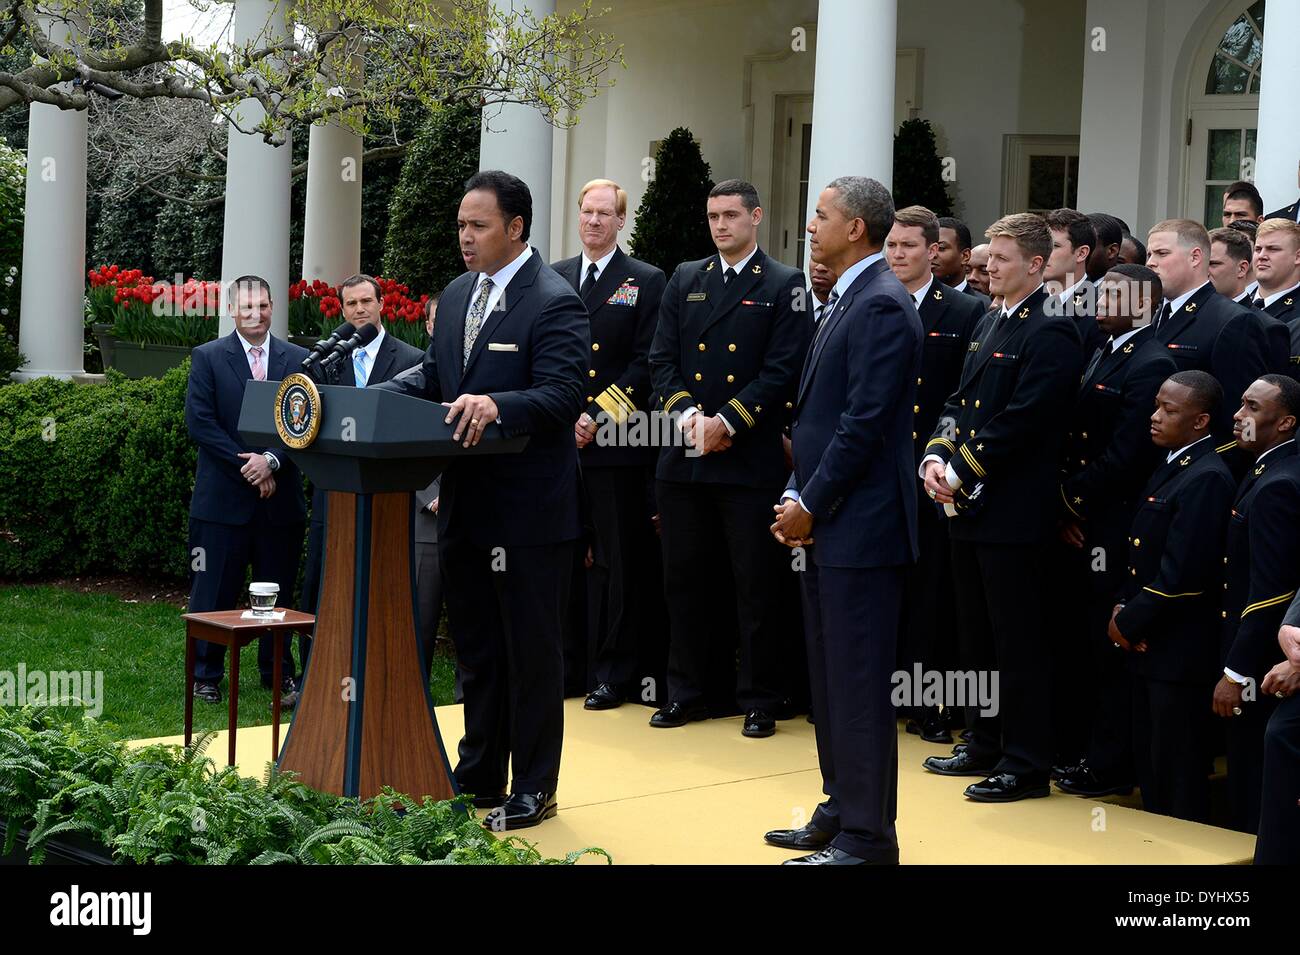 Ken Niumatalolo, the head coach of the U.S. Naval Academy football team thanks President Barack Obama during an event on the South Lawn of the White House April 18, 2014 in Washington, D.C. The president presented the Navy Midshipmen with the Commander-in-Chief's Trophy, which goes to the Department of Defense academy team with the most victories against its Service rivals. Stock Photo